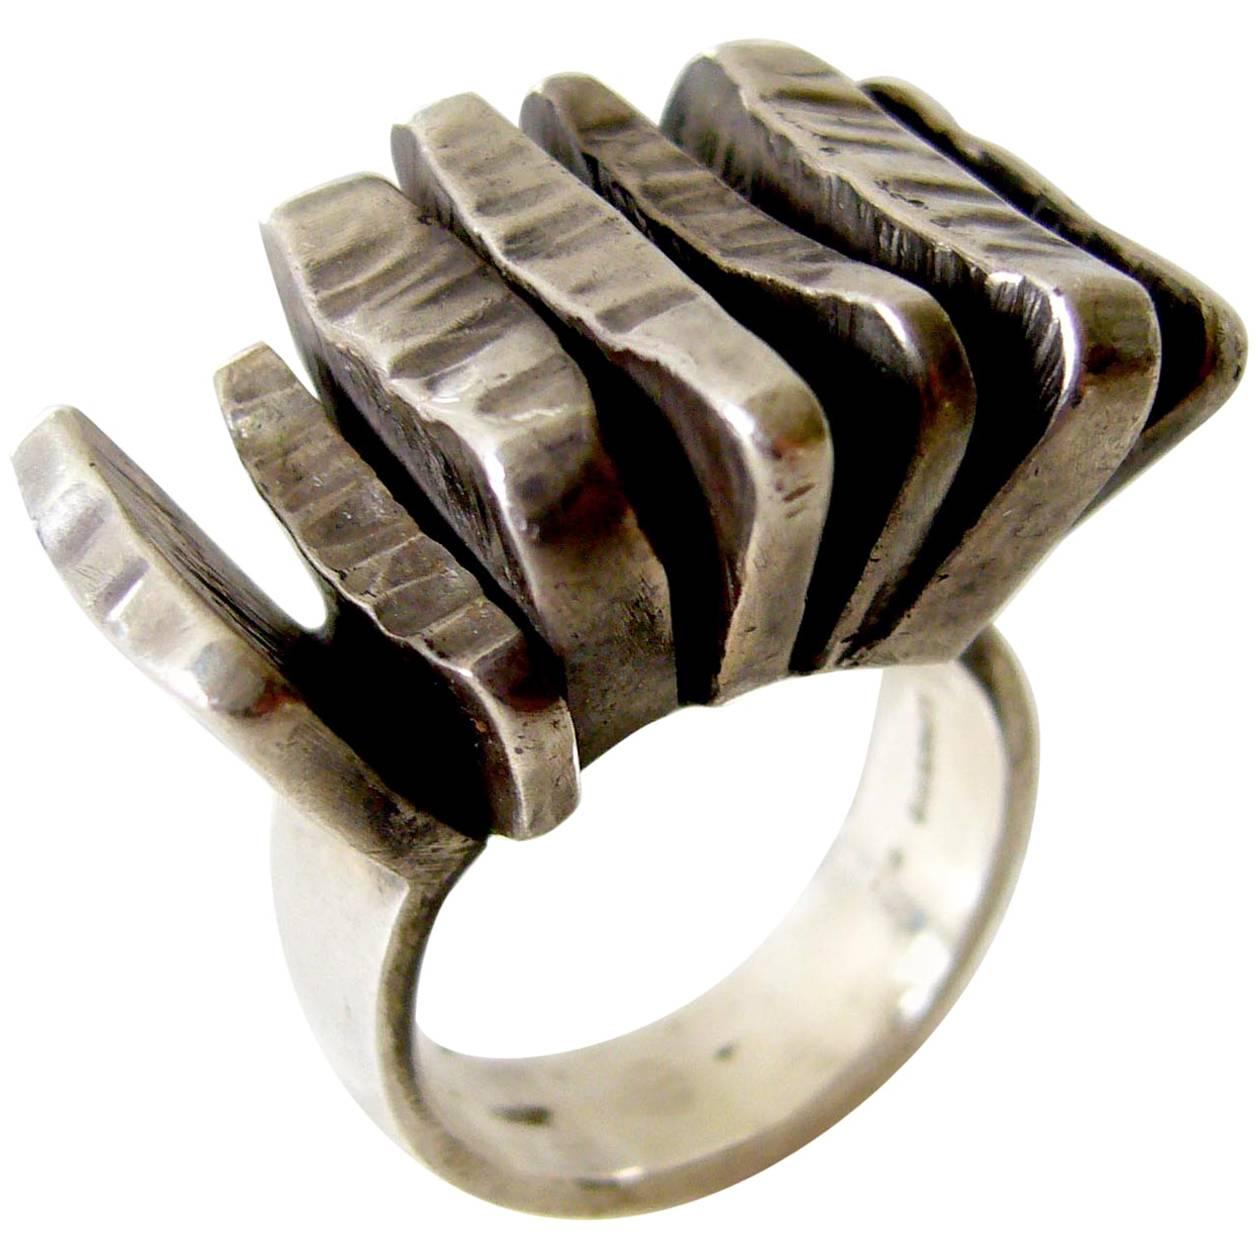 Rey Urban for A. Fausing Sterling Silver Scandinavian Street Style Ring